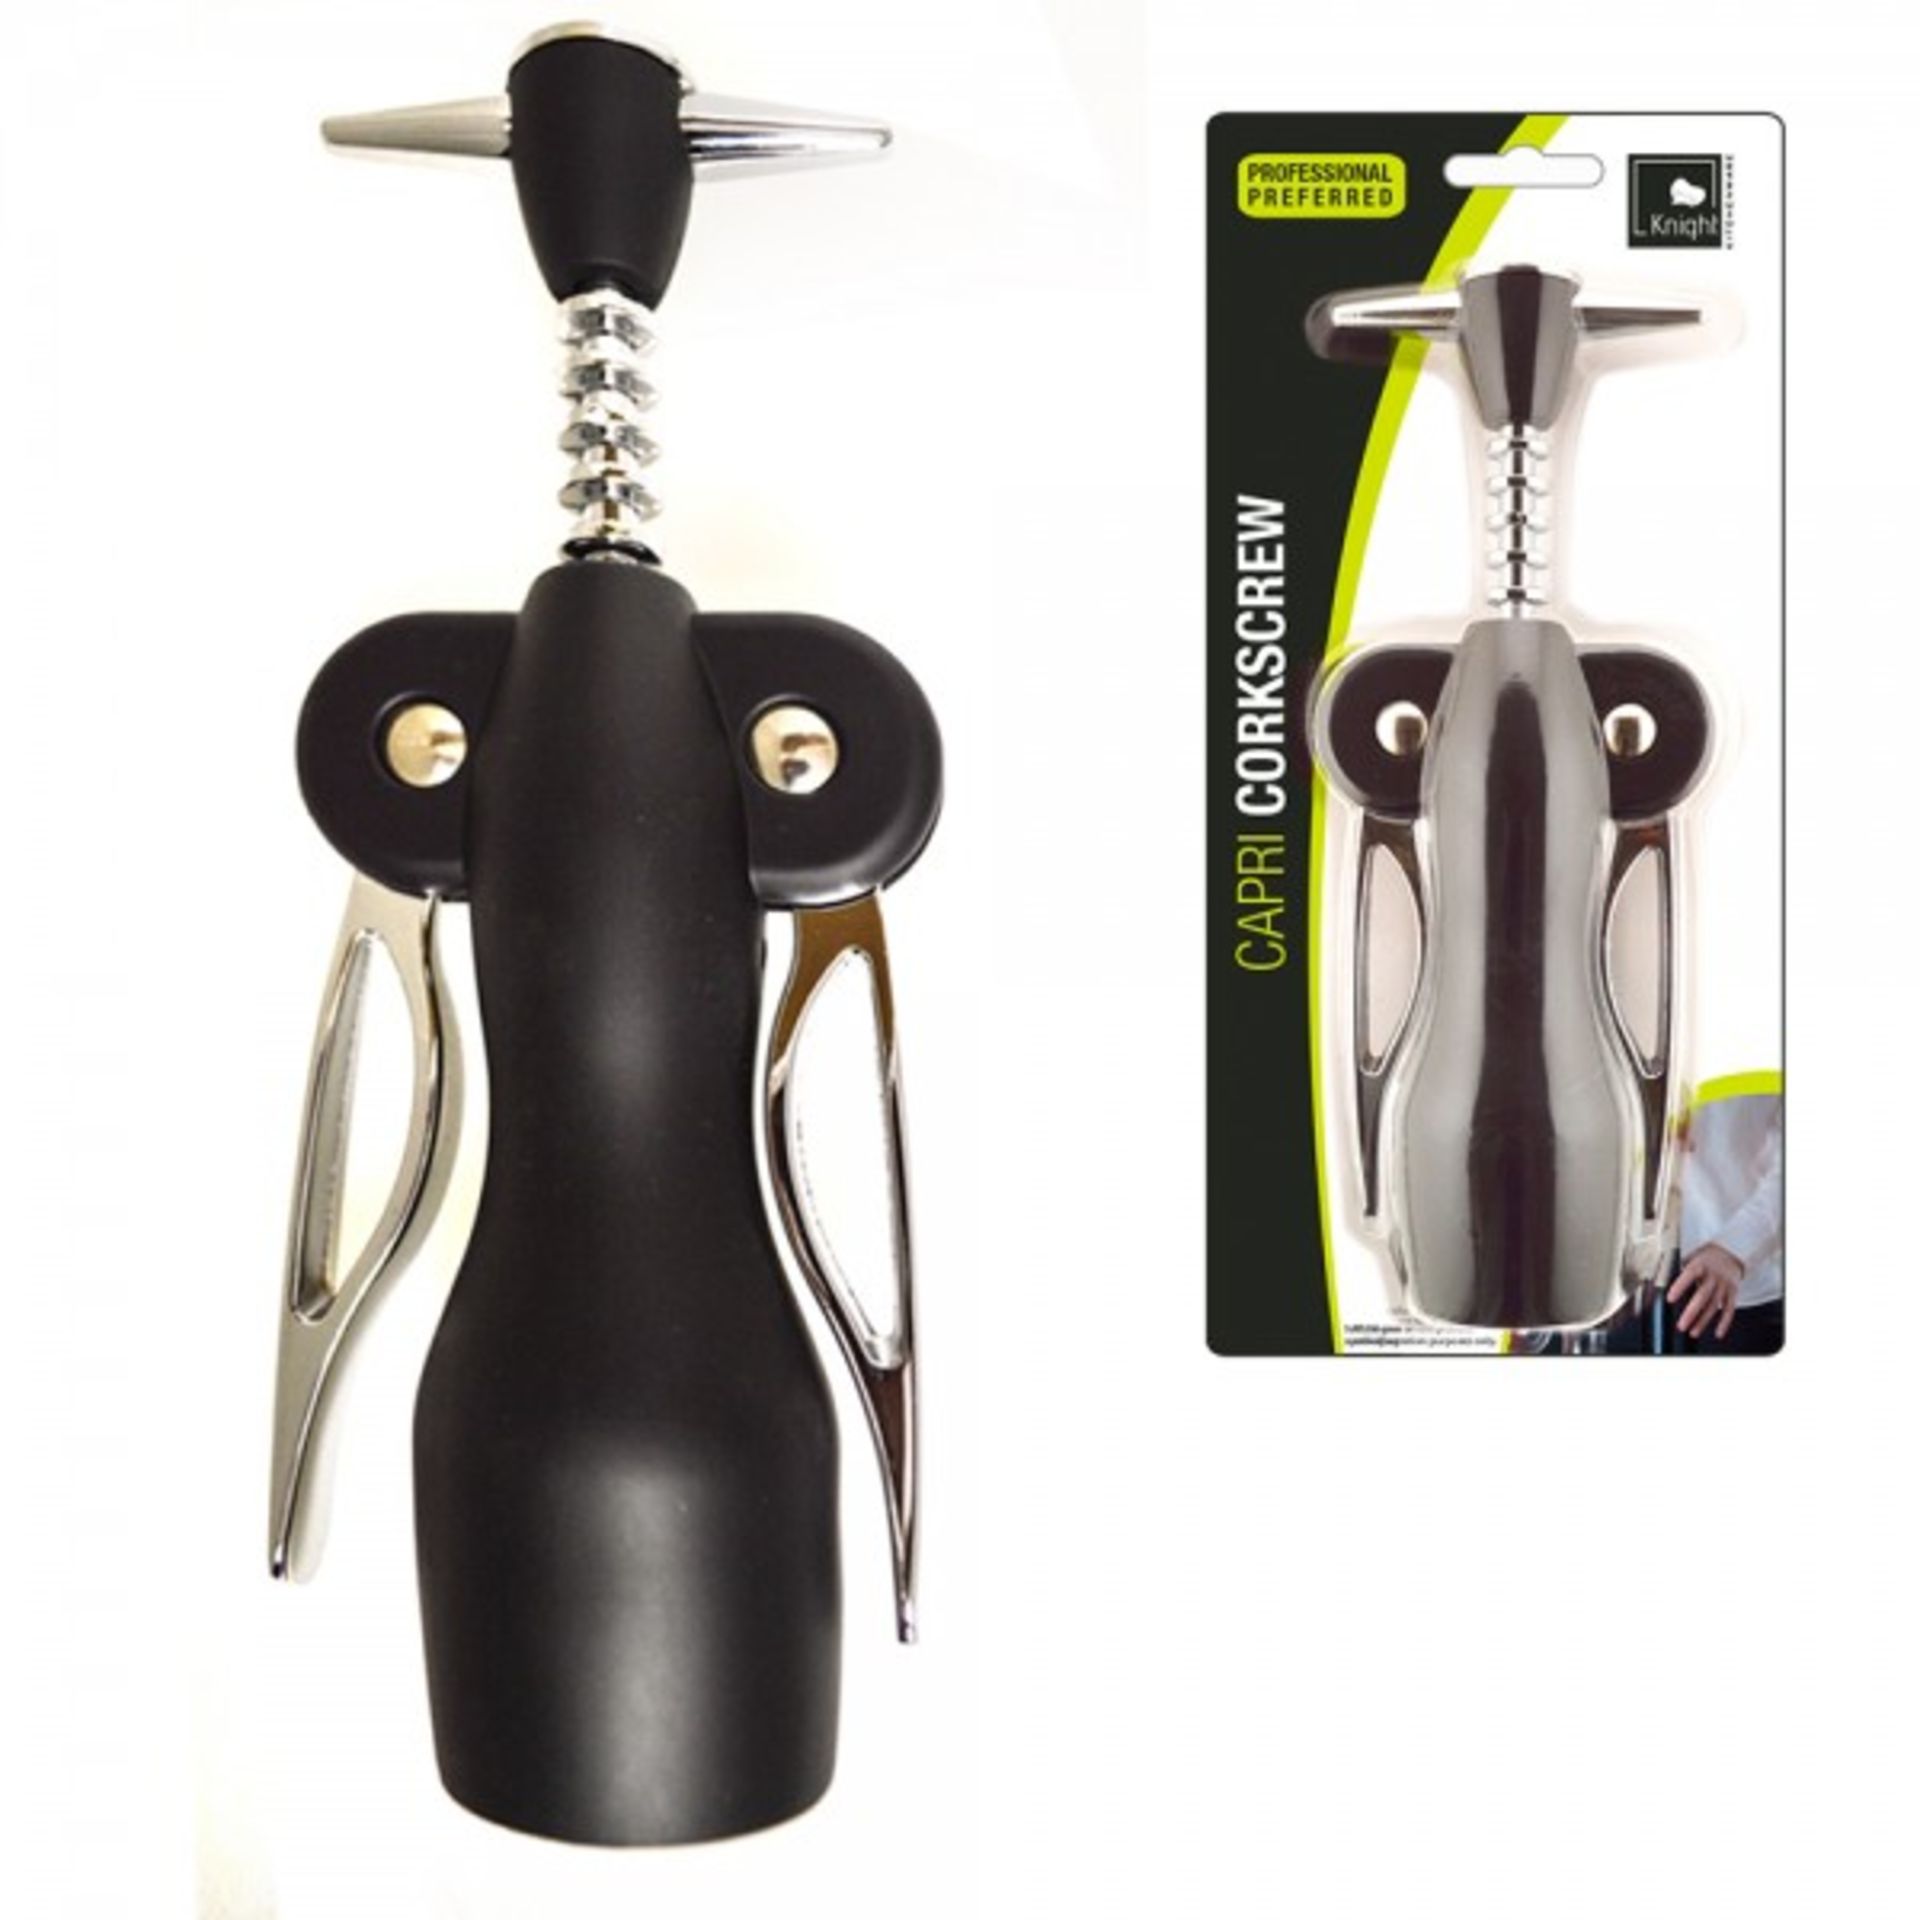 V *TRADE QTY* Brand New Capri Corkscrew Wine Bottle Opener X 4 YOUR BID PRICE TO BE MULTIPLIED BY